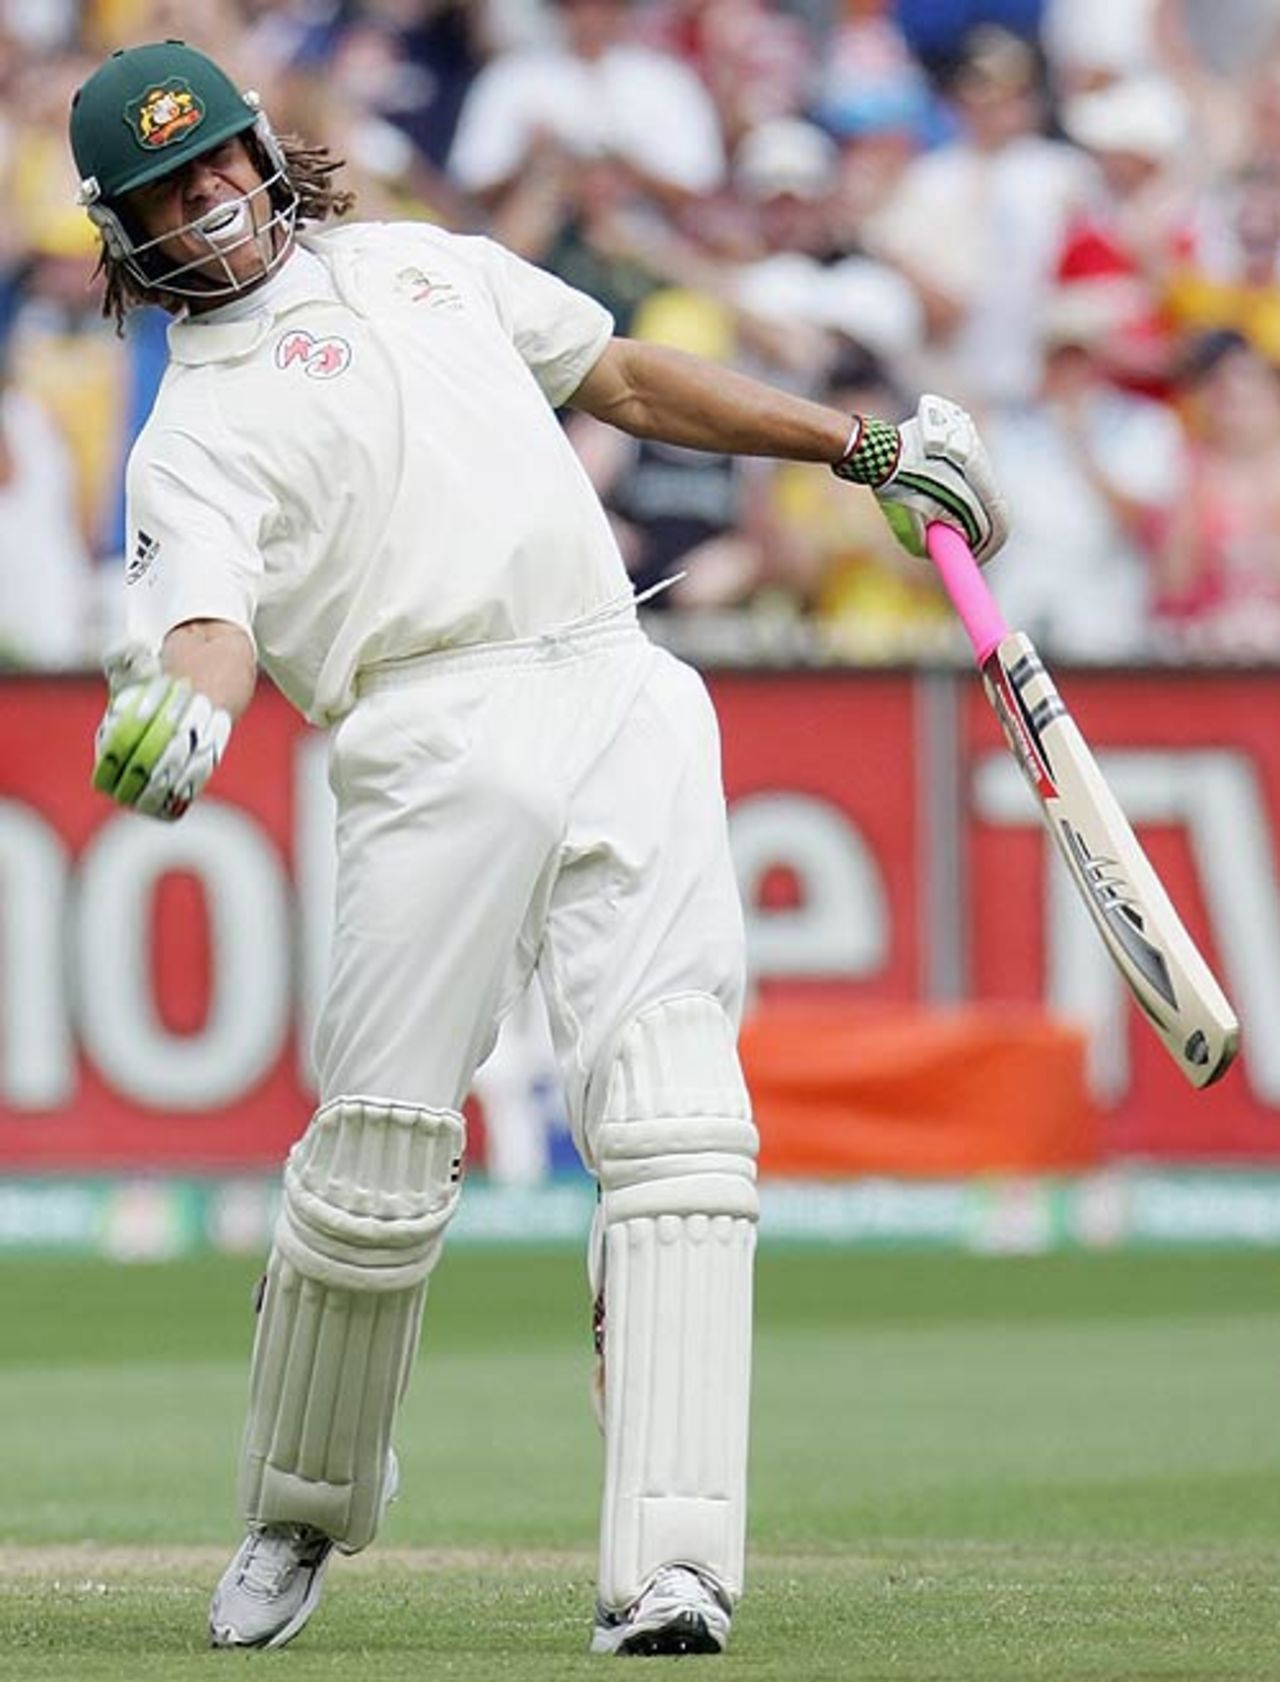 Andrew Symonds shows his joy at scoring his first Test century, Australia v England, 4th Test, Melbourne, December 27, 2006